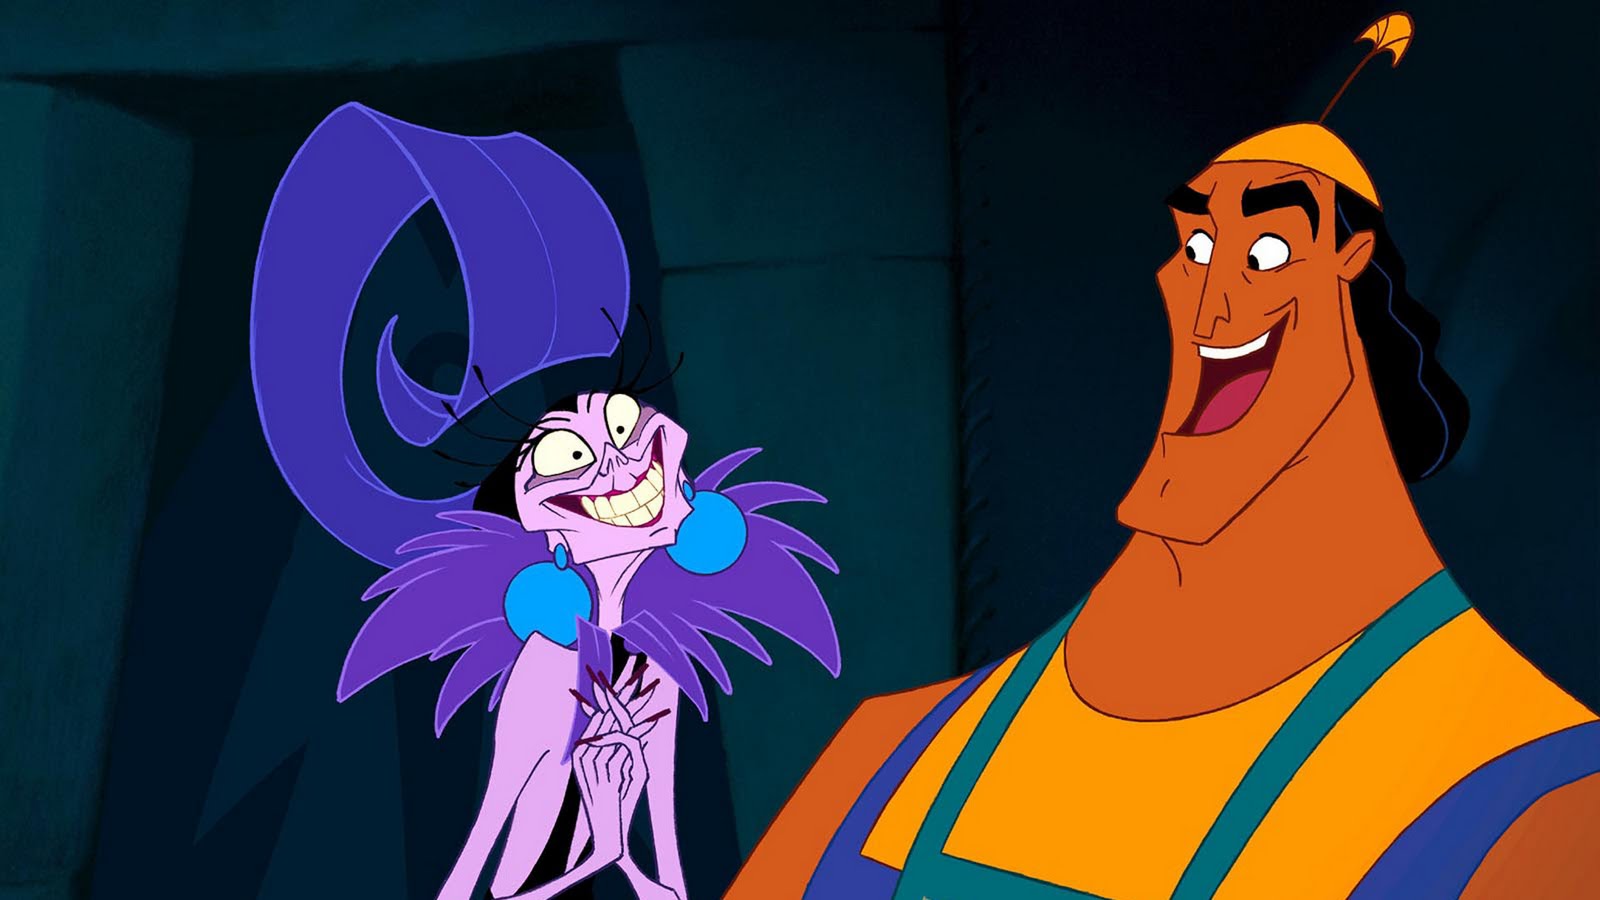 My Background Blog: the emperors new groove